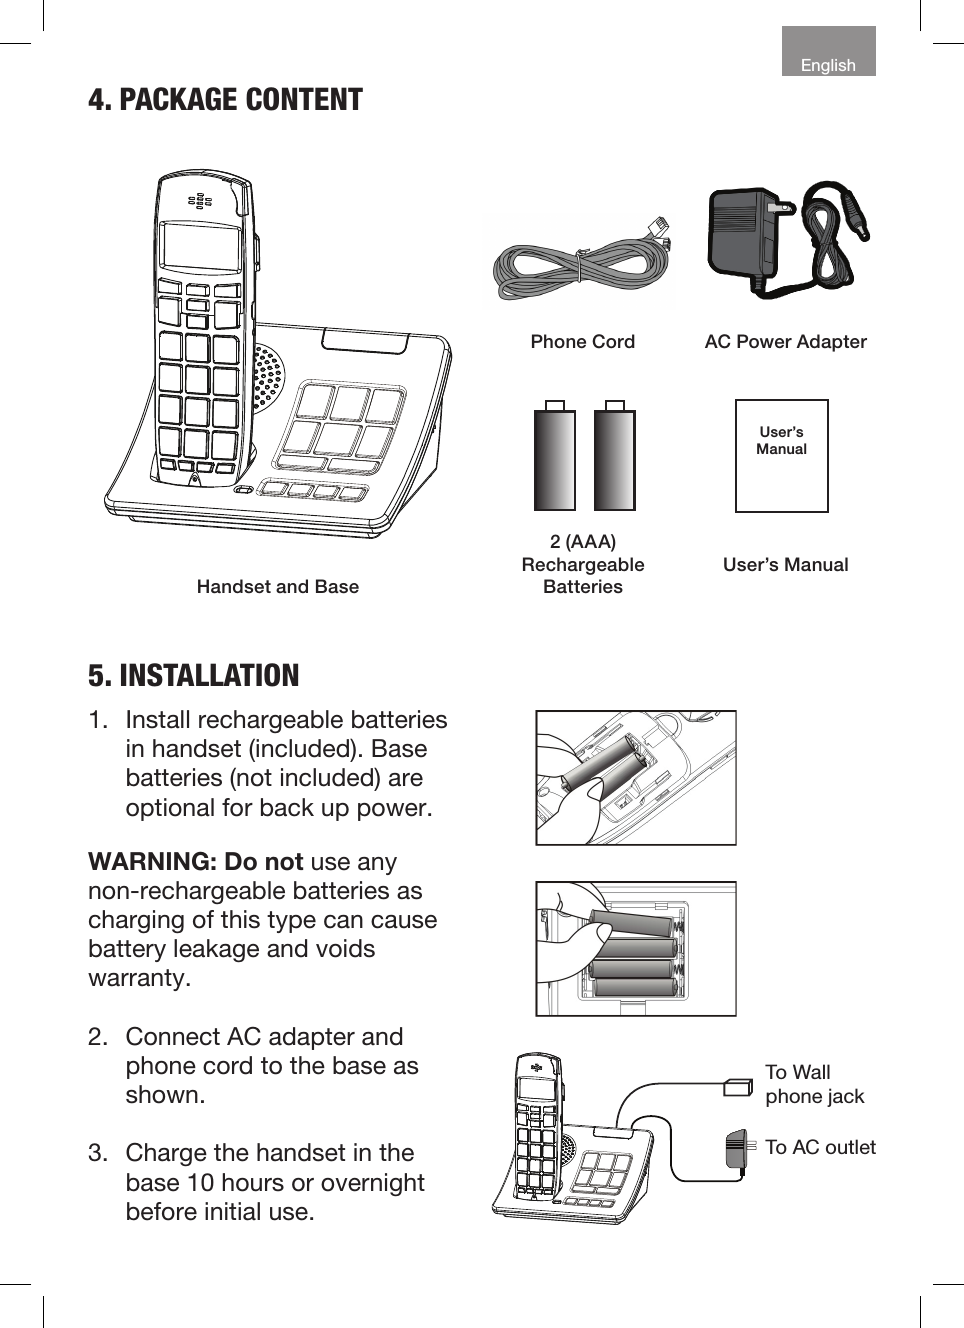 English4. PACKAGE CONTENTPhone Cord AC Power AdapterUser’s ManualUser’s ManualHandset and Base2 (AAA) RechargeableBatteries5. INSTALLATION1.  Install rechargeable batteries in handset (included). Base batteries (not included) are optional for back up power.WARNING: Do not use any non-rechargeable batteries as charging of this type can cause battery leakage and voids warranty.2.  Connect AC adapter and phone cord to the base as shown.3.  Charge the handset in the base 10 hours or overnight before initial use.To Wall phone jackTo AC outlet